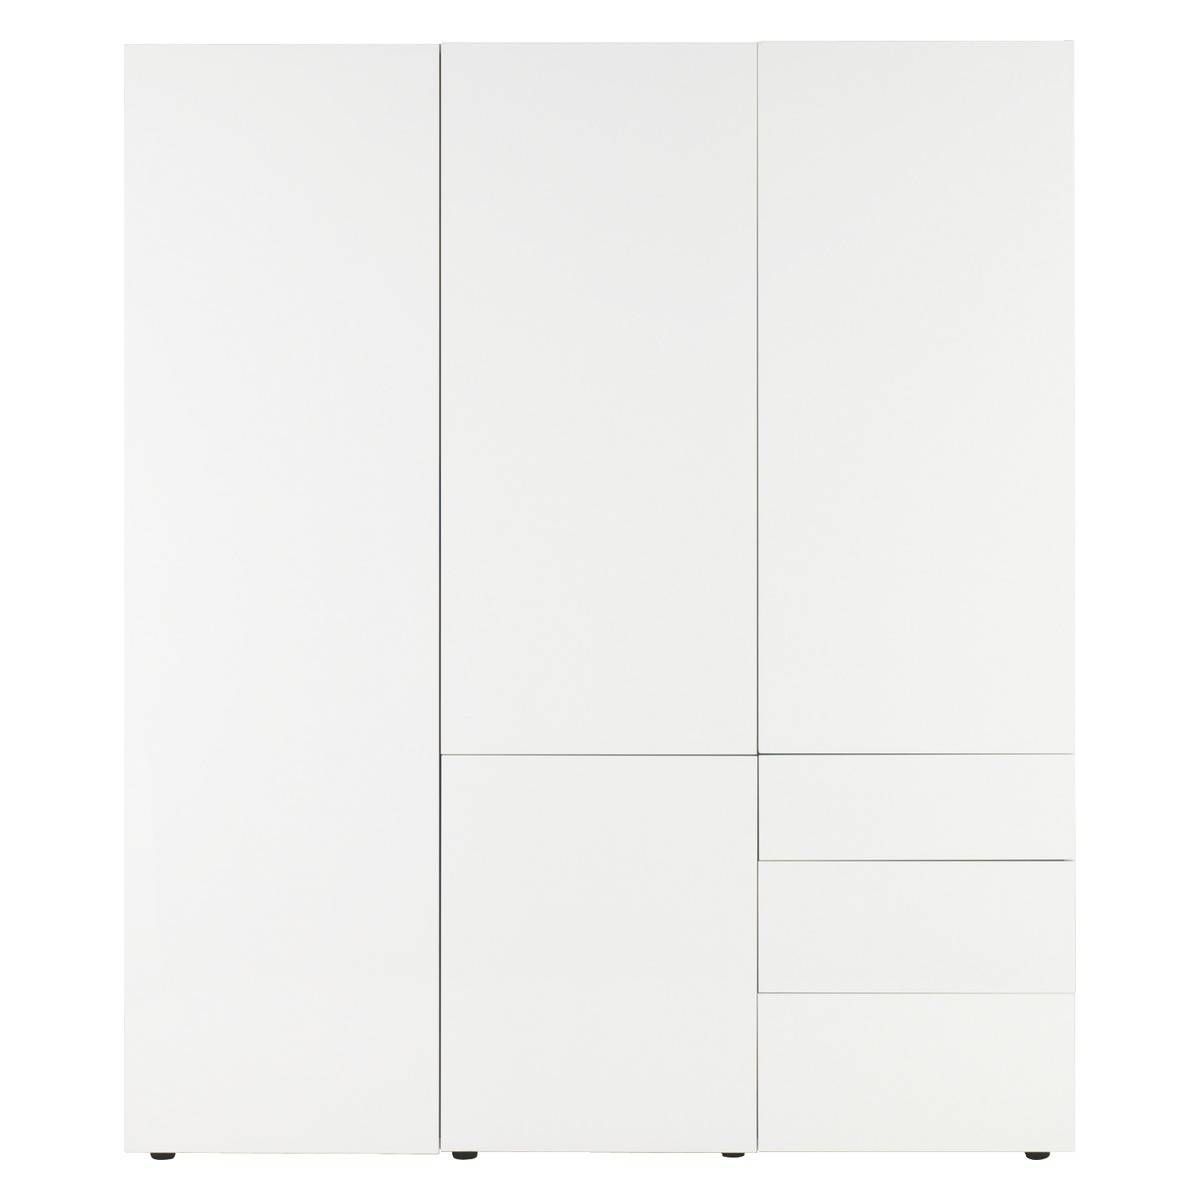 Perouse White 3 Door Wardrobe 180cm Width | Buy Now At Habitat Uk Intended For White Three Door Wardrobes (View 15 of 15)